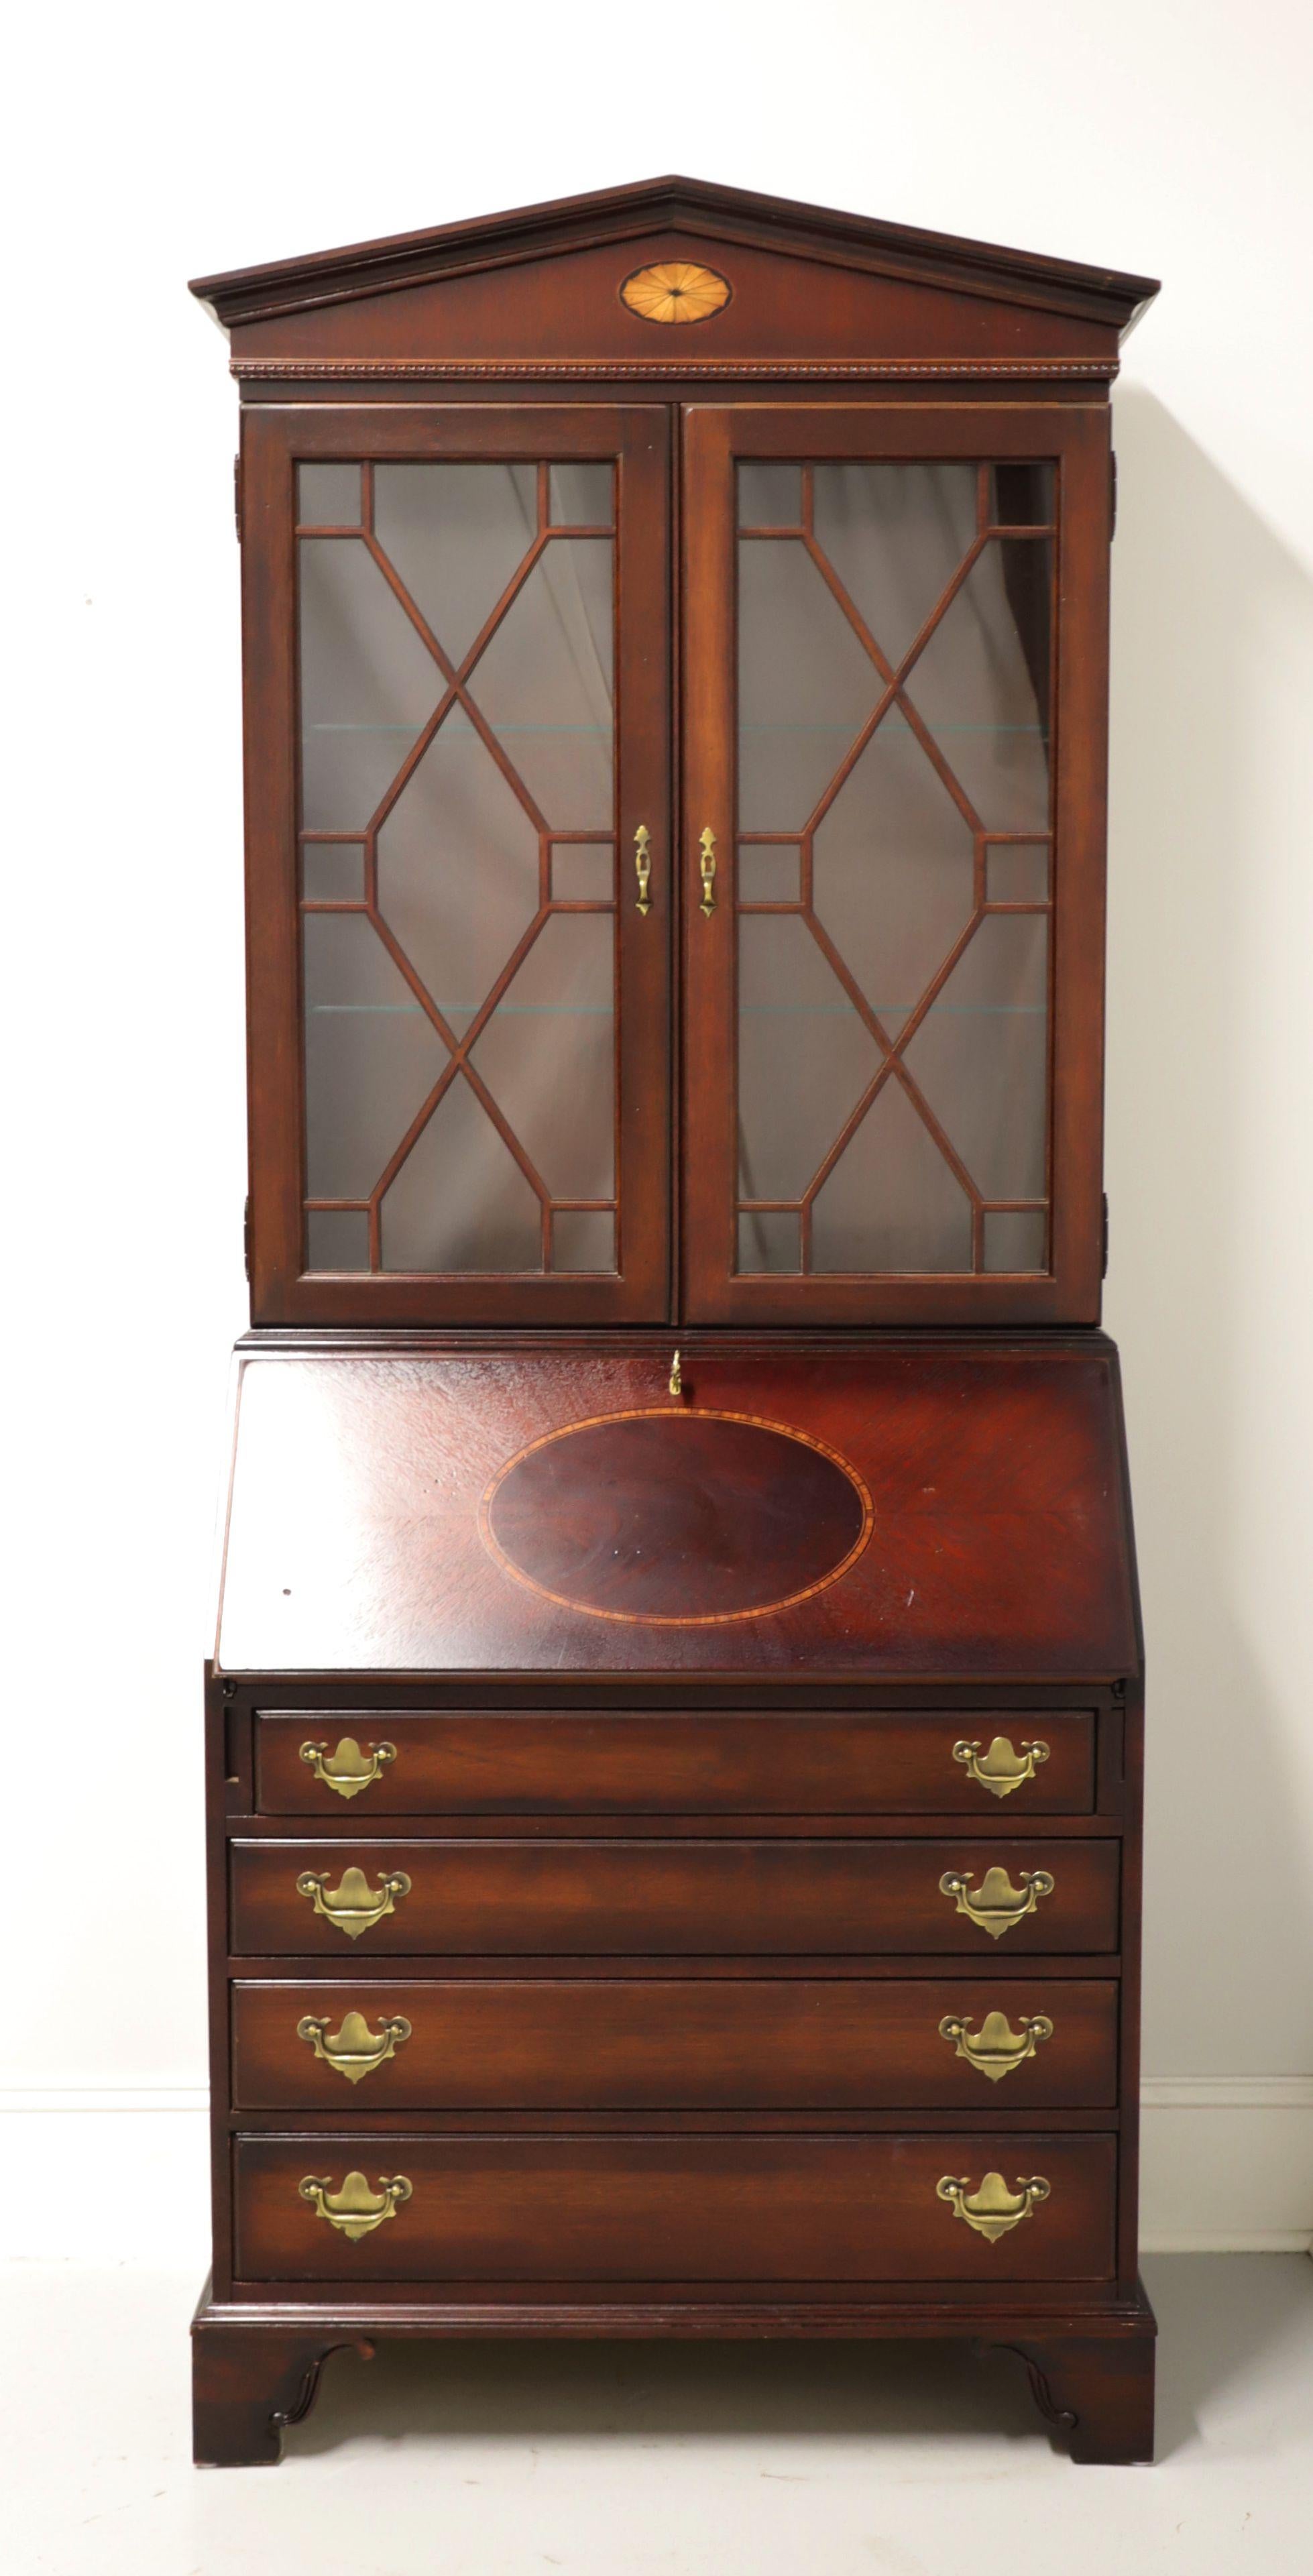 A Chippendale style secretary desk by Jasper Cabinet Company, their 